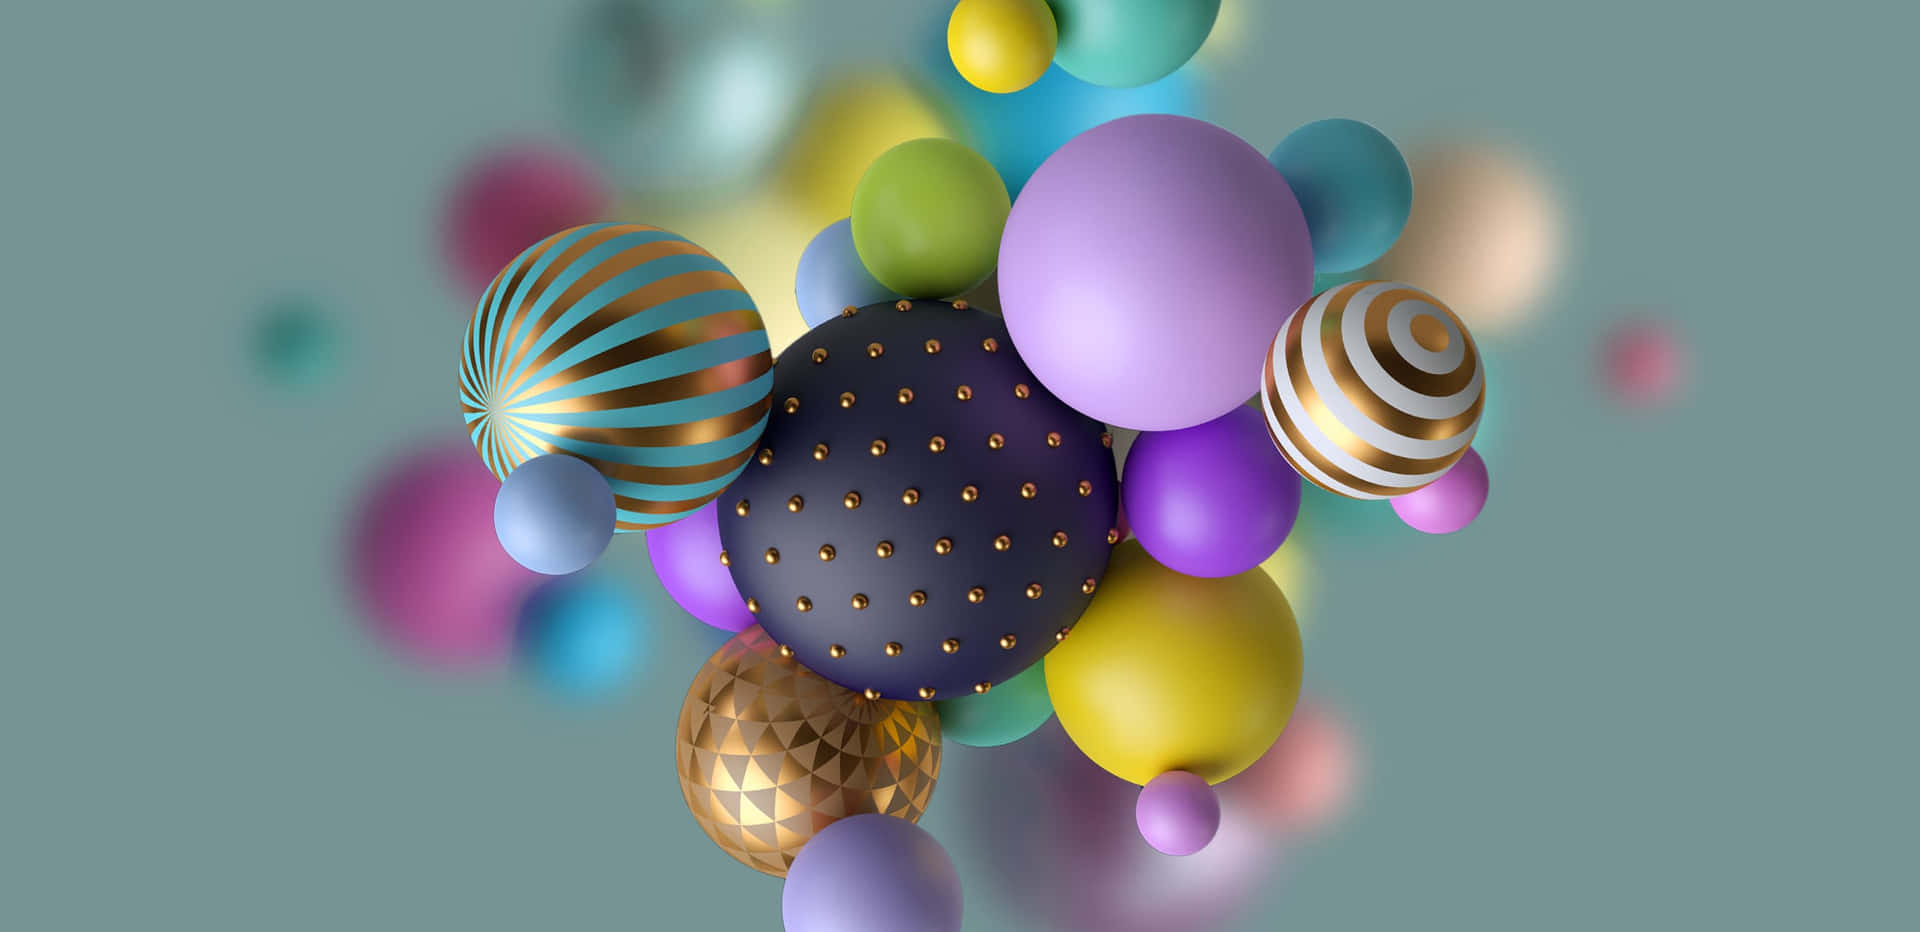 Colorful Balls Floating In The Air Background